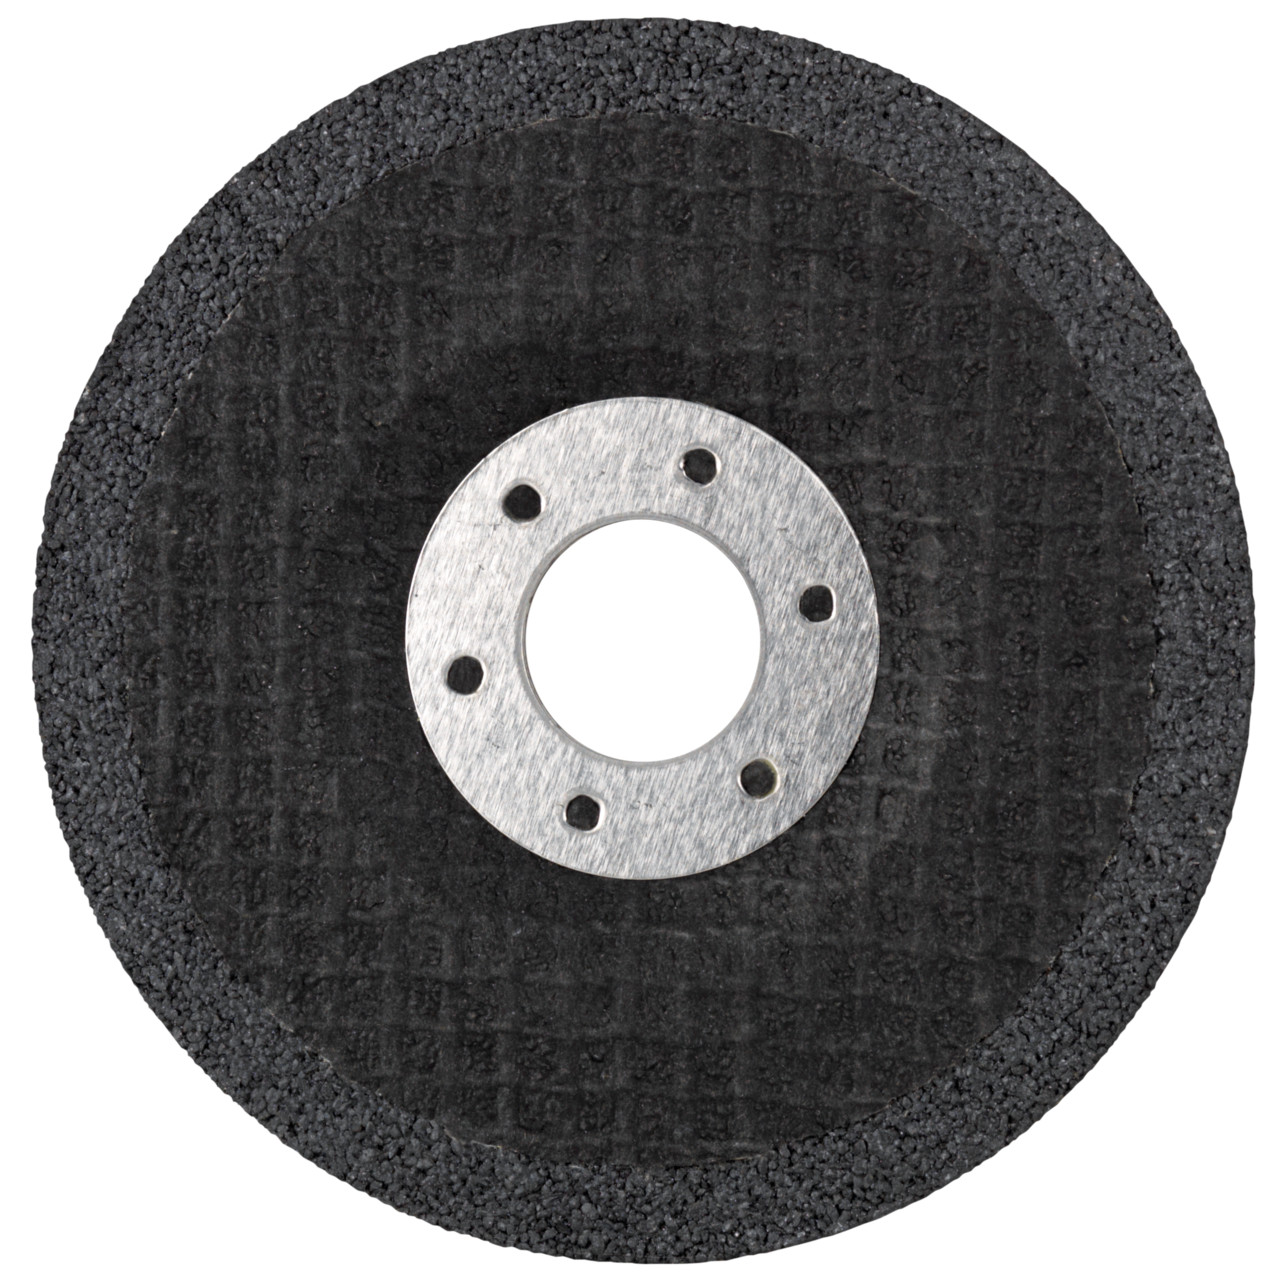 Tyrolit Cutting disc CUT AND GRIND DxUxH 178x3.5x22.23 2in1 for steel and stainless steel, shape: 27CC - offset version (CUT AND GRIND), Art. 743944